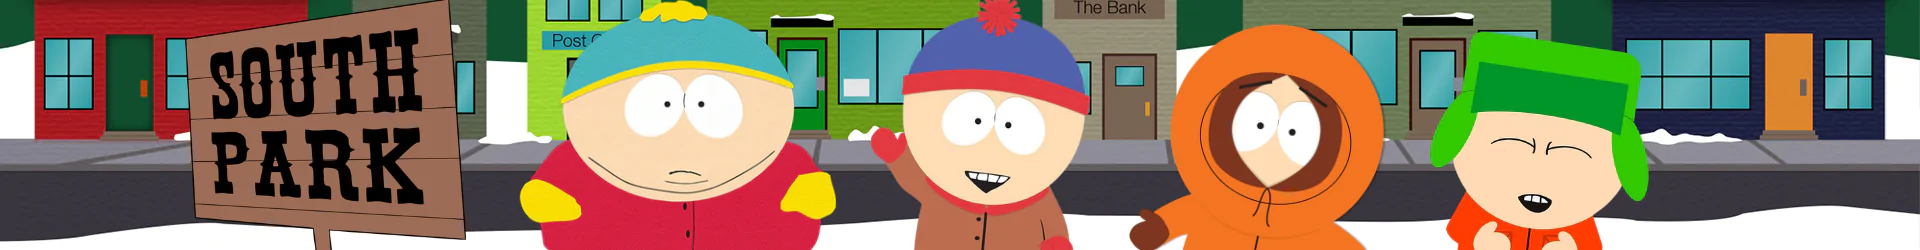 South Park notebooks  banner